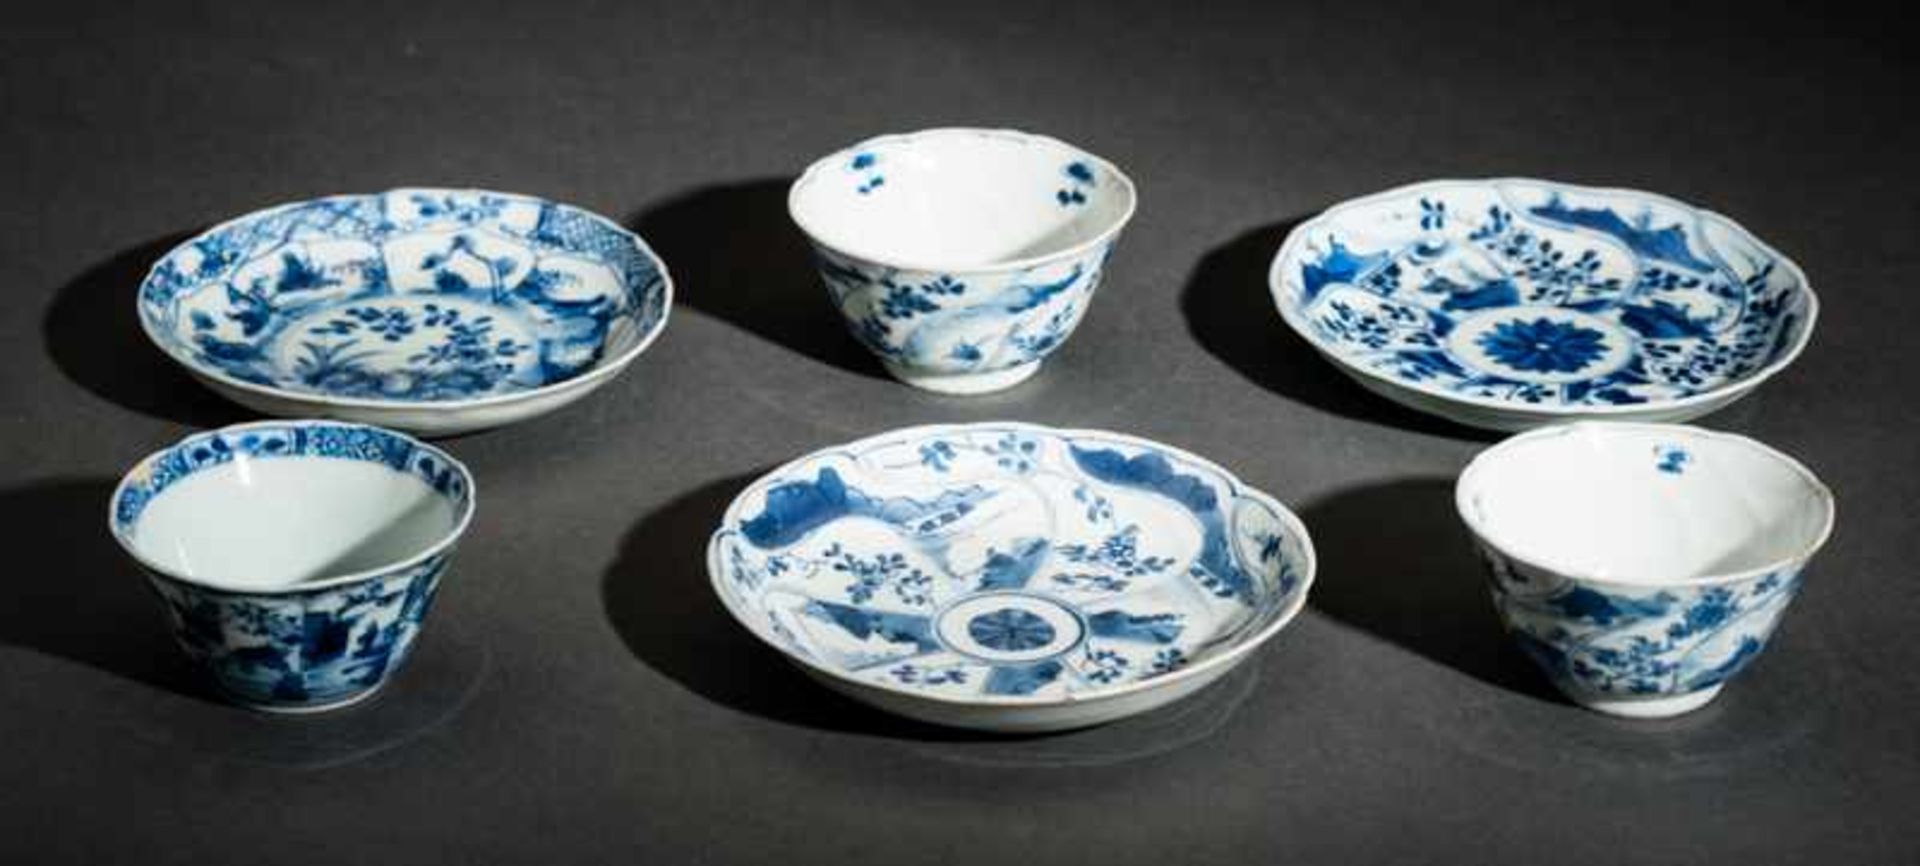 THREE CUPS WITH SAUCERS Blue and white porcelain. China, Qing-dynasty, 18th cent.The stylistic